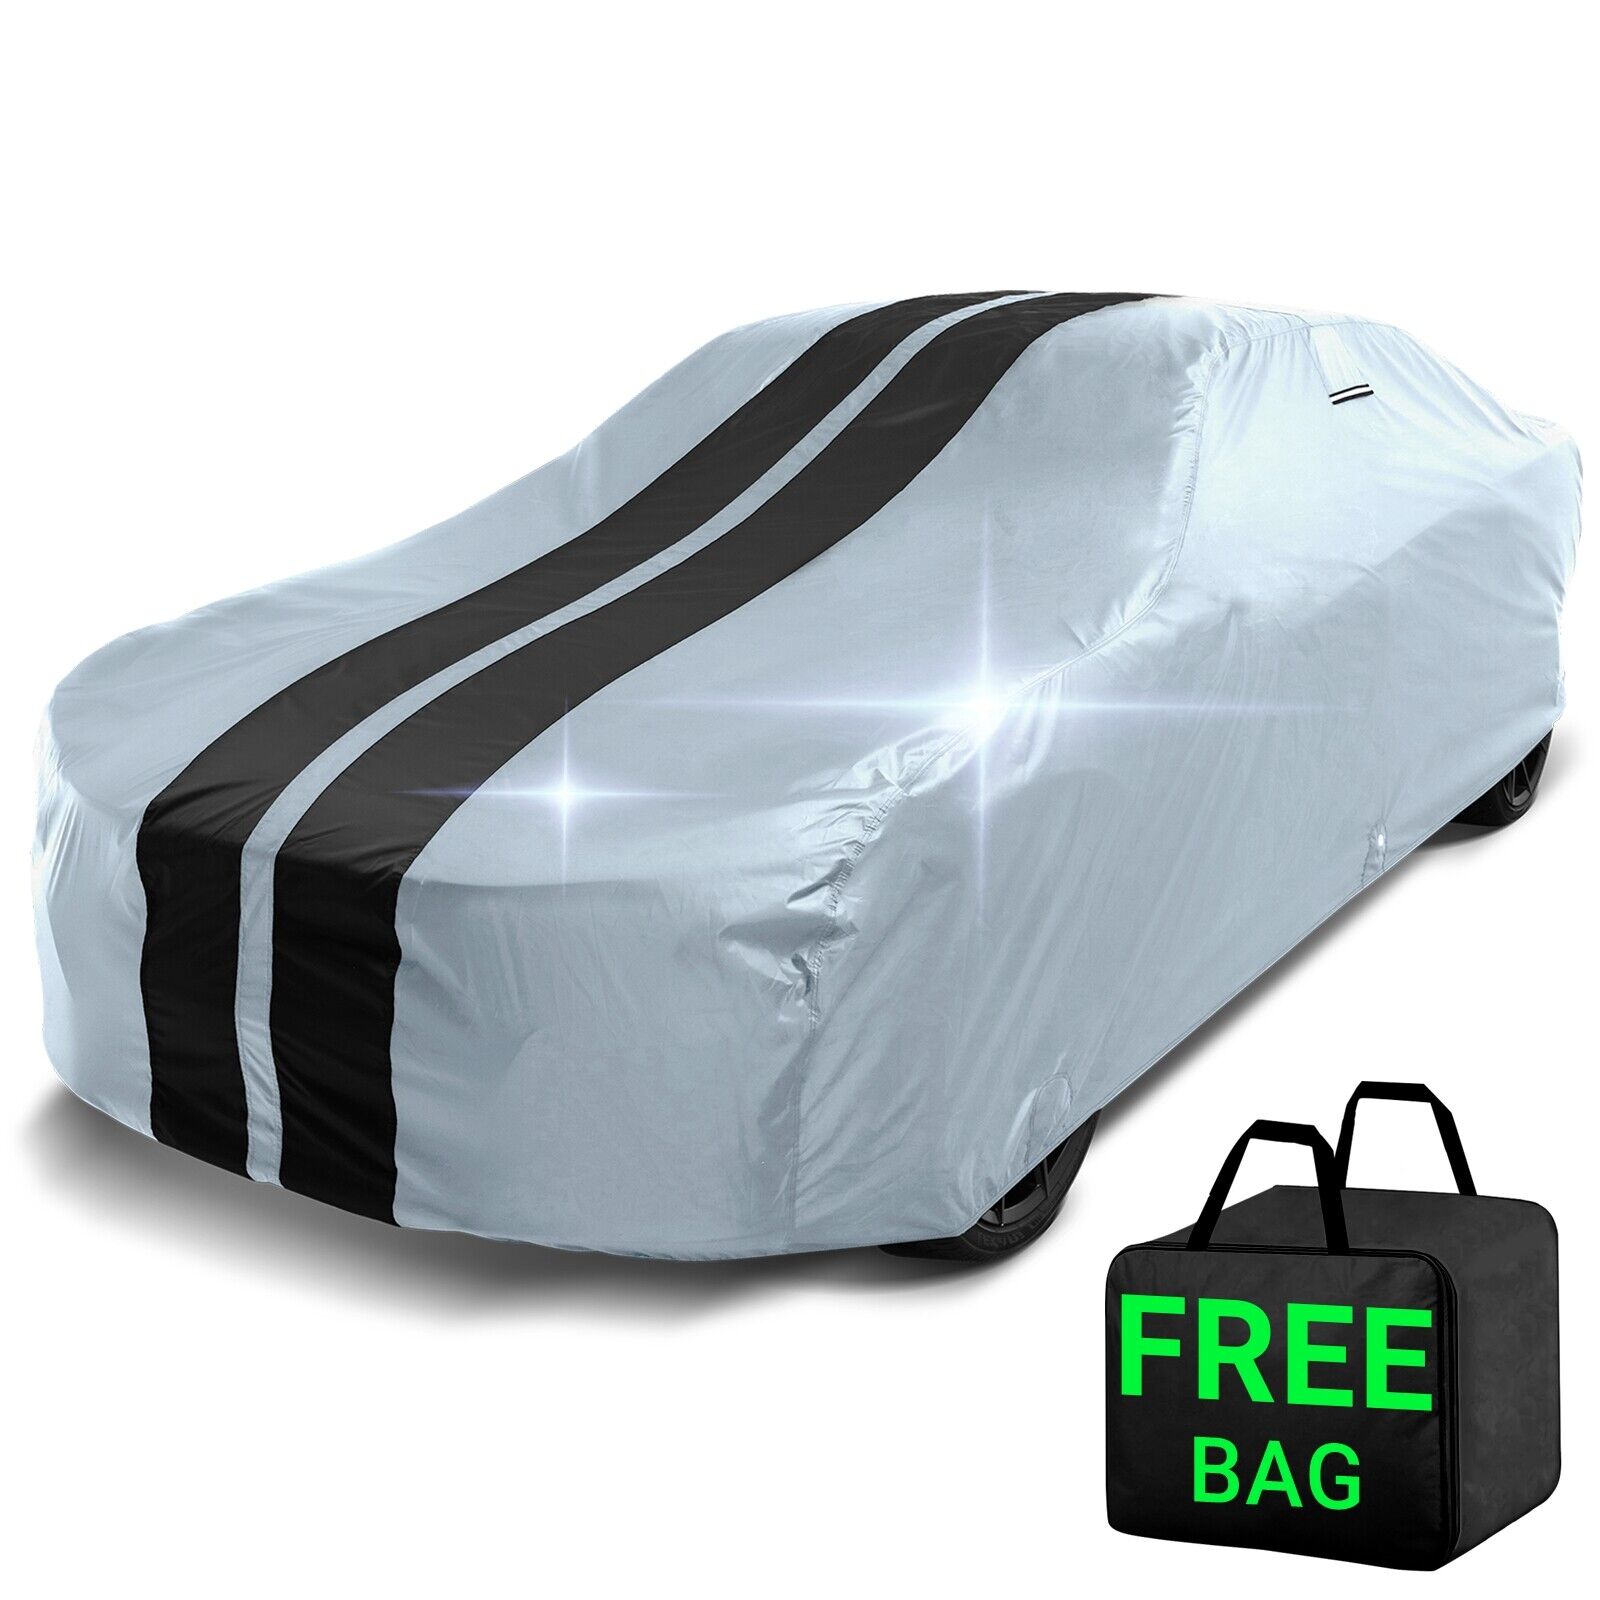 Ford Fairmont Custom-Fit [PREMIUM] Outdoor Waterproof Car Cover [FULL WARRANTY]